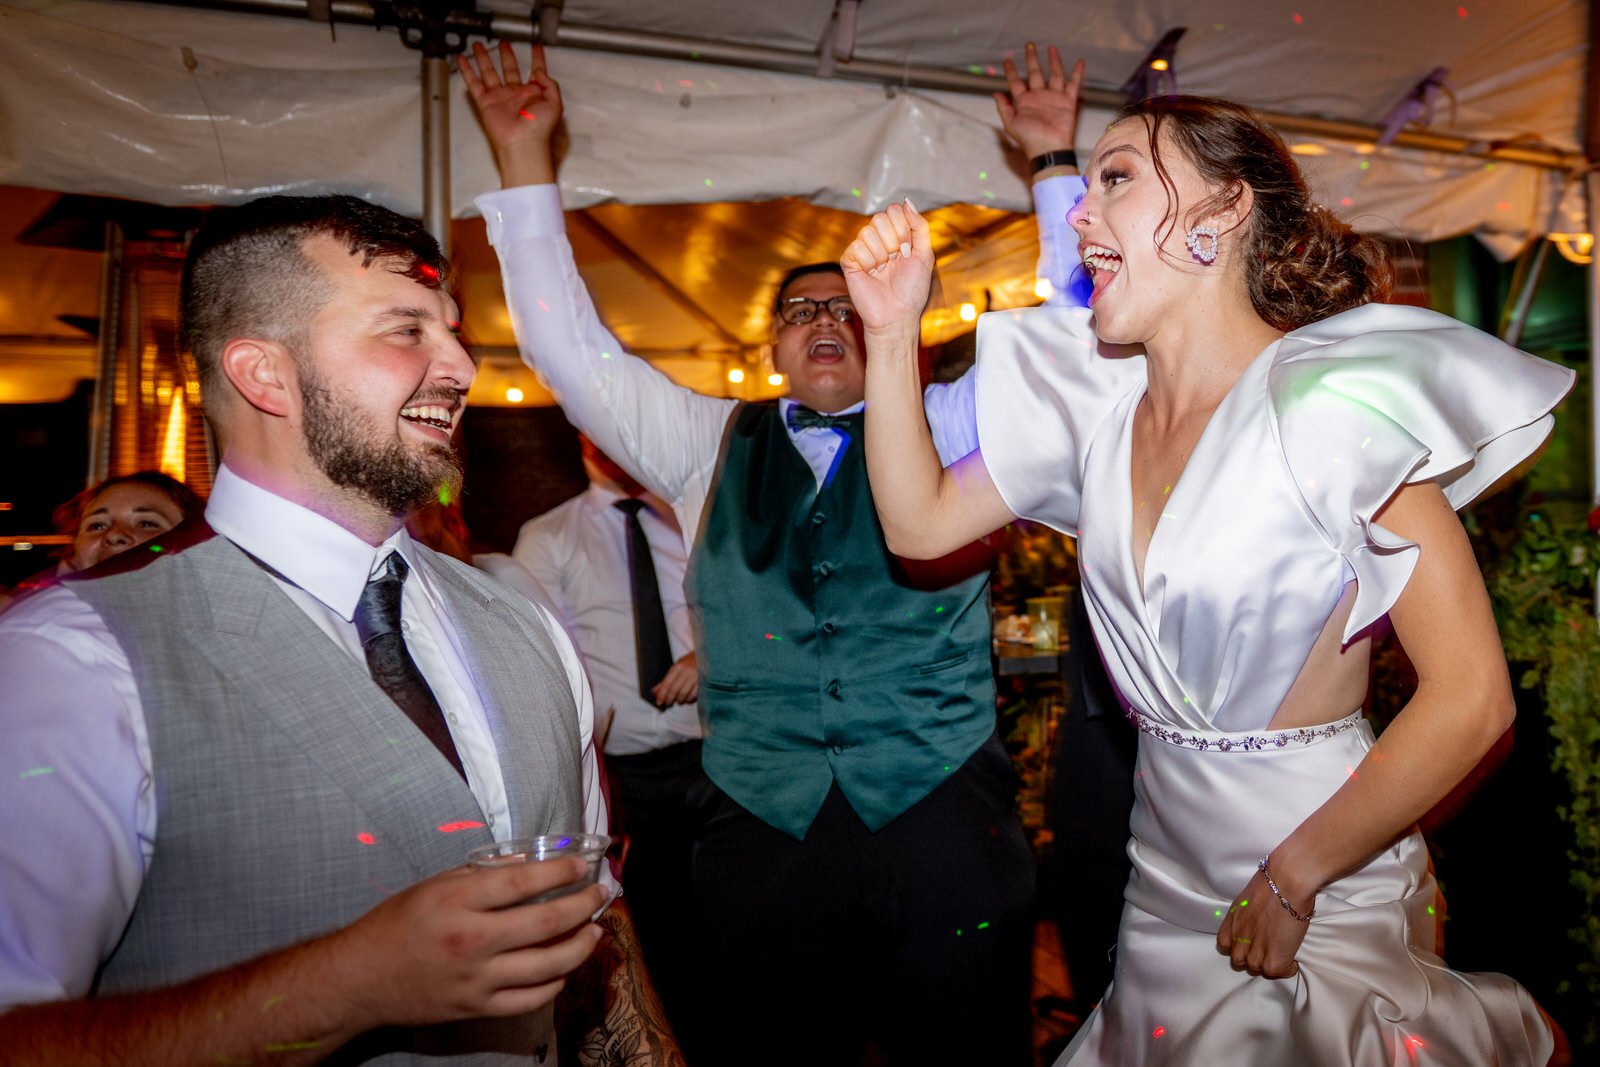 Ampersea_Baltimore_Maryland_Wedding_Suzanne&Andrew_Dance_Party-5478.jpg